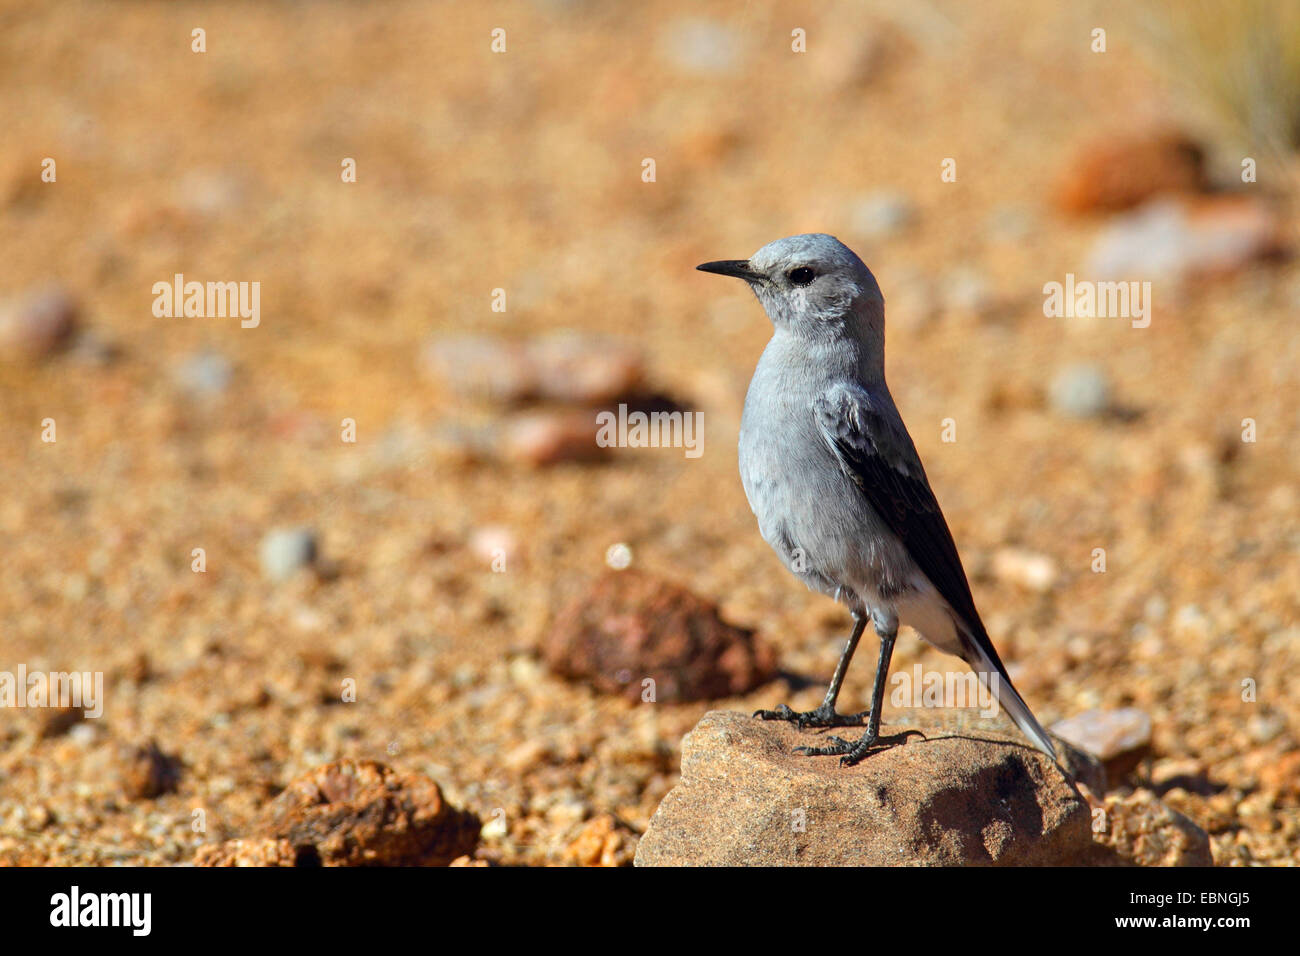 mountain wheatear (Oenanthe monticola), male of the grey form stands on a stone, South Africa, Augrabies Falls National Park Stock Photo